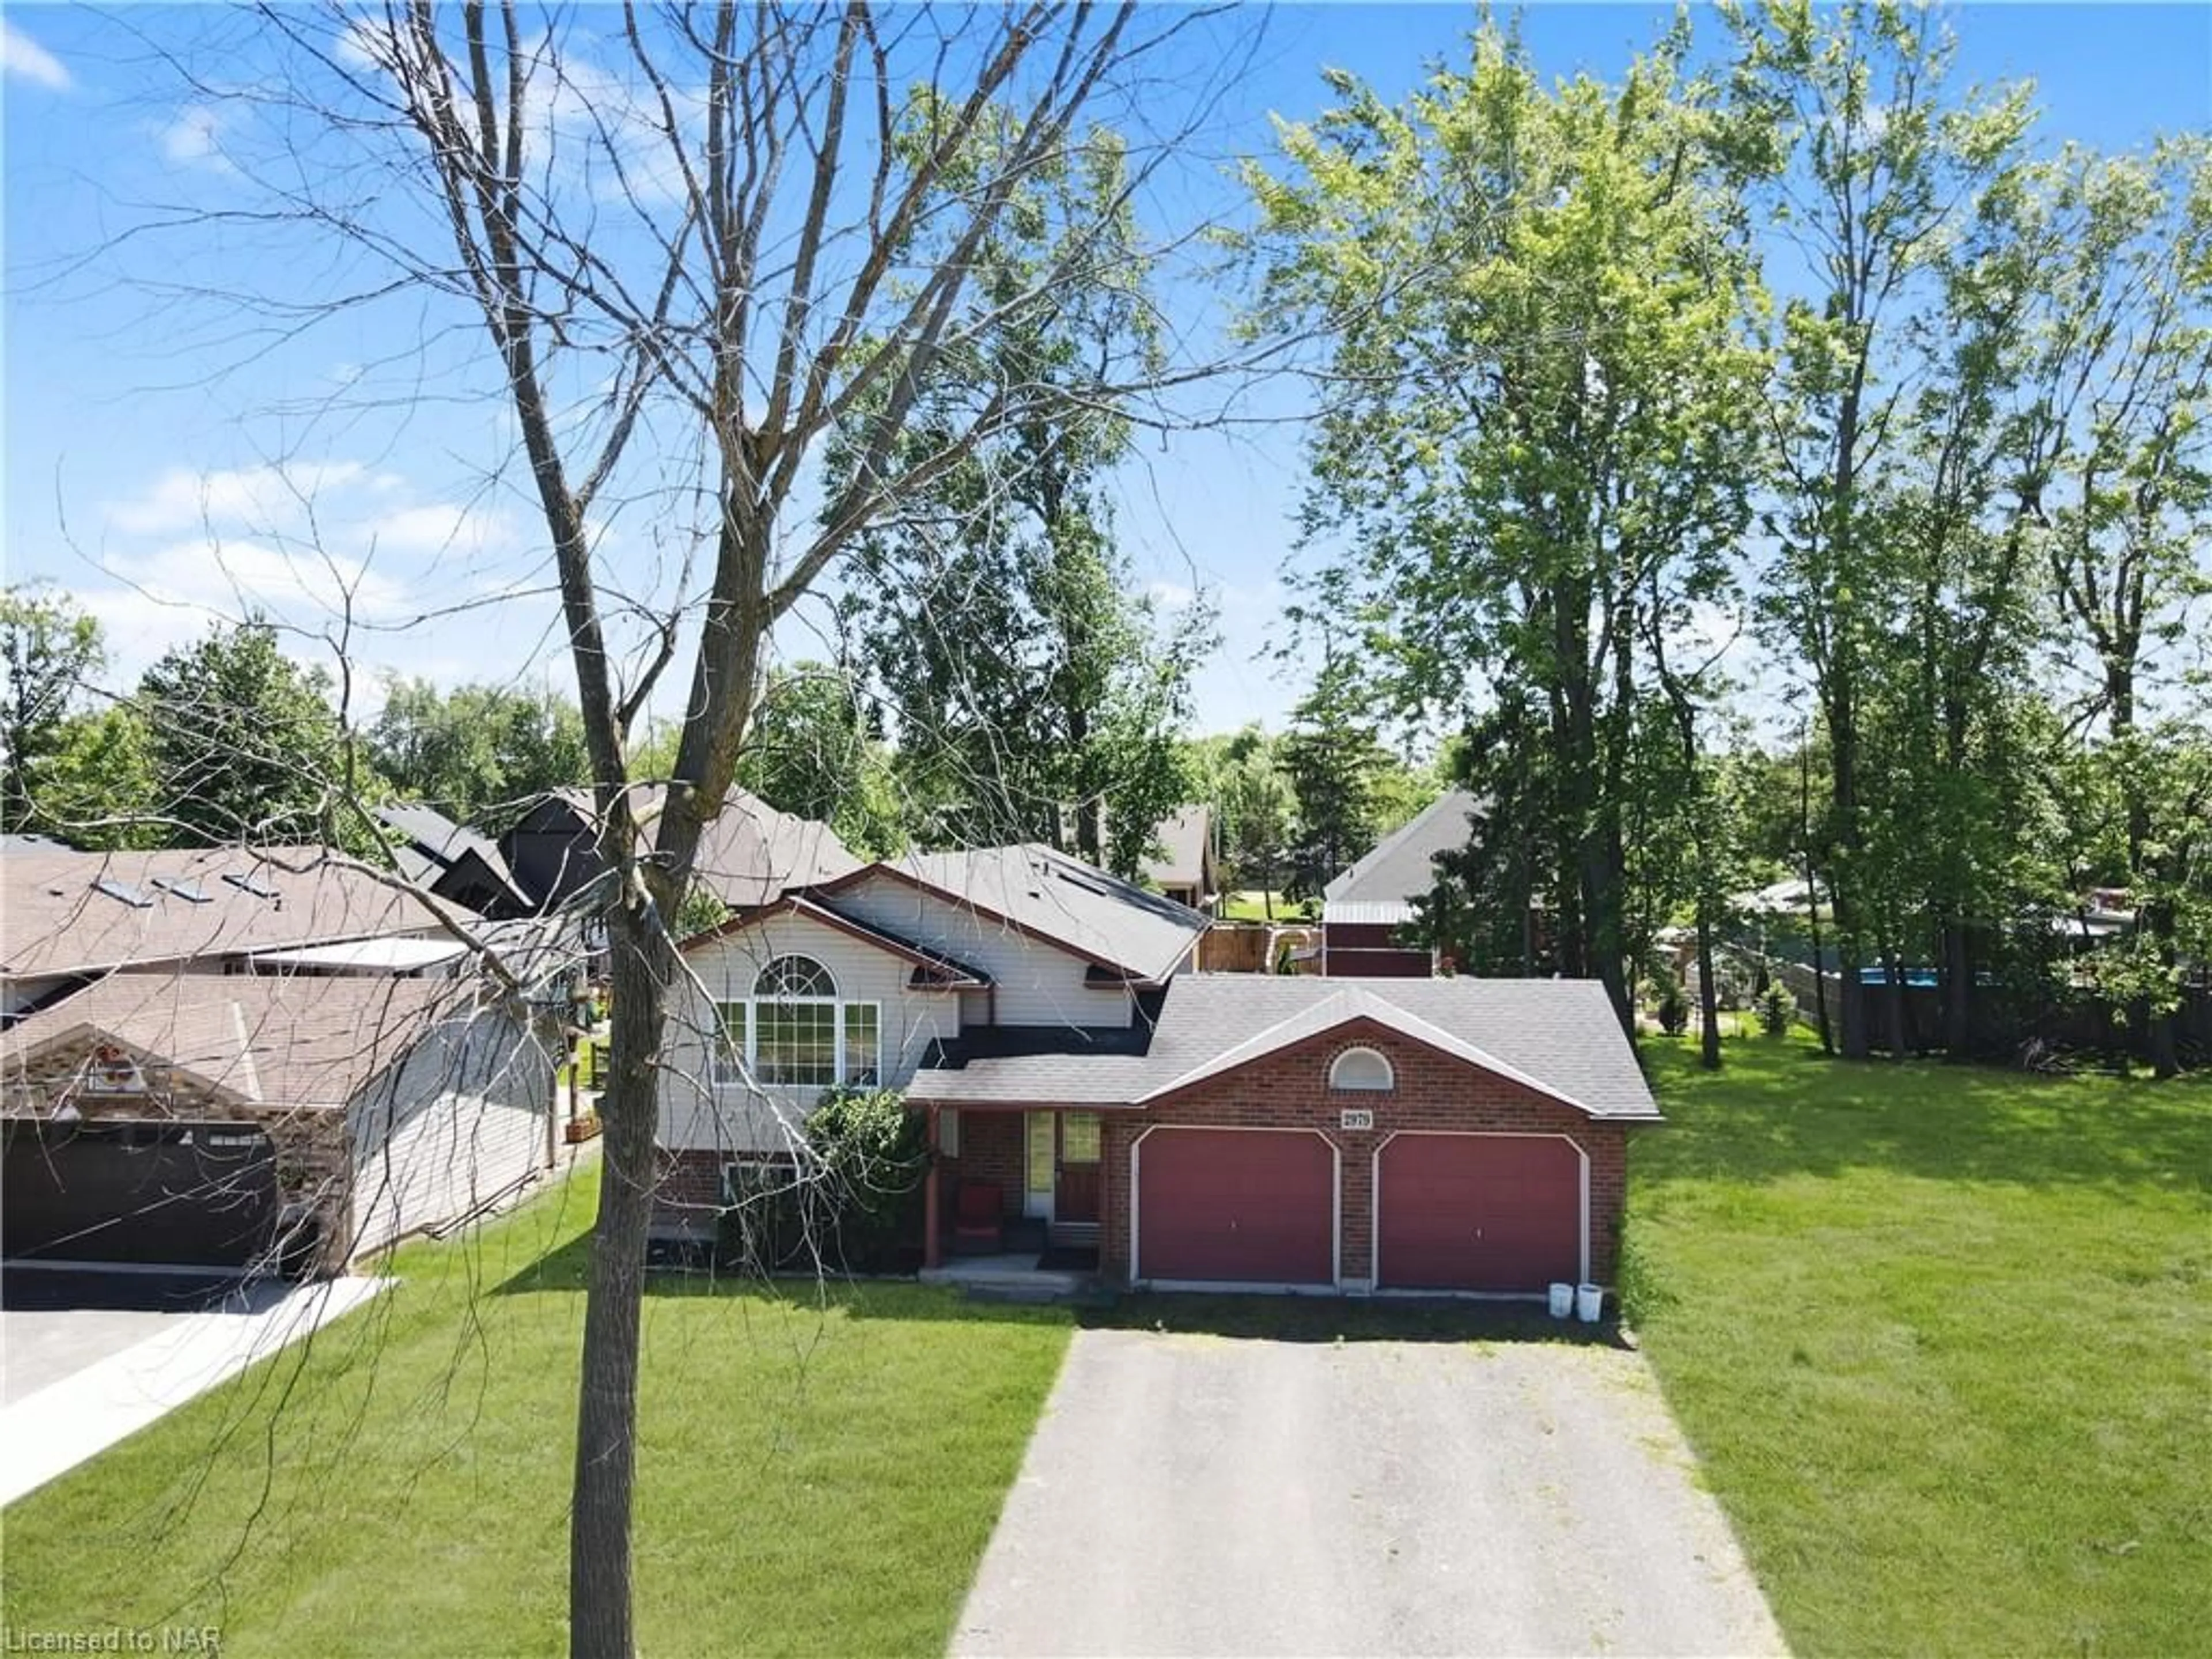 Frontside or backside of a home for 2979 Riselay Ave, Ridgeway Ontario L0S 1N0